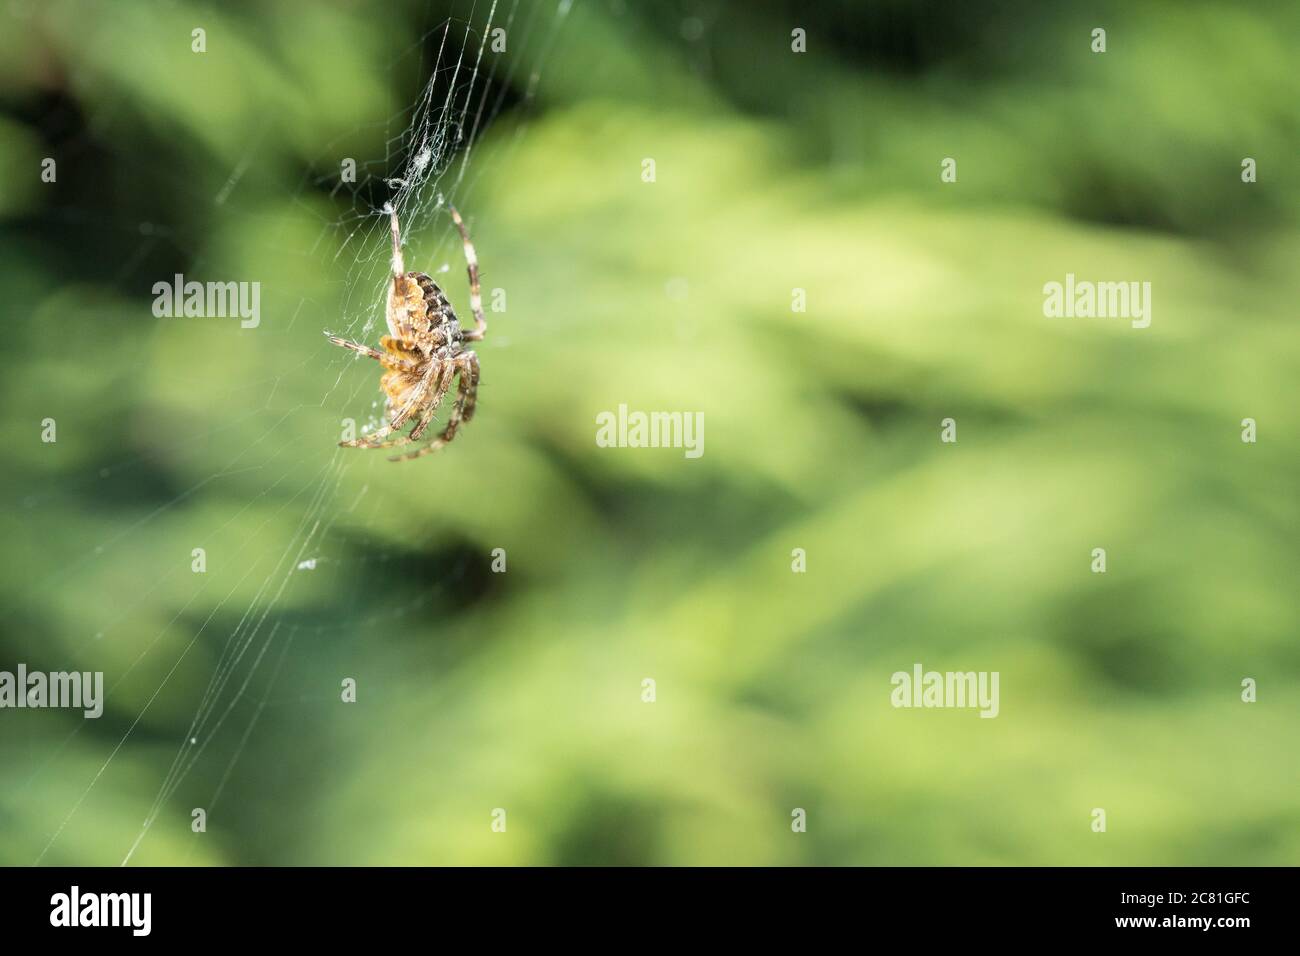 Closeup shot of a spider on a spider net with blurred green background Stock Photo